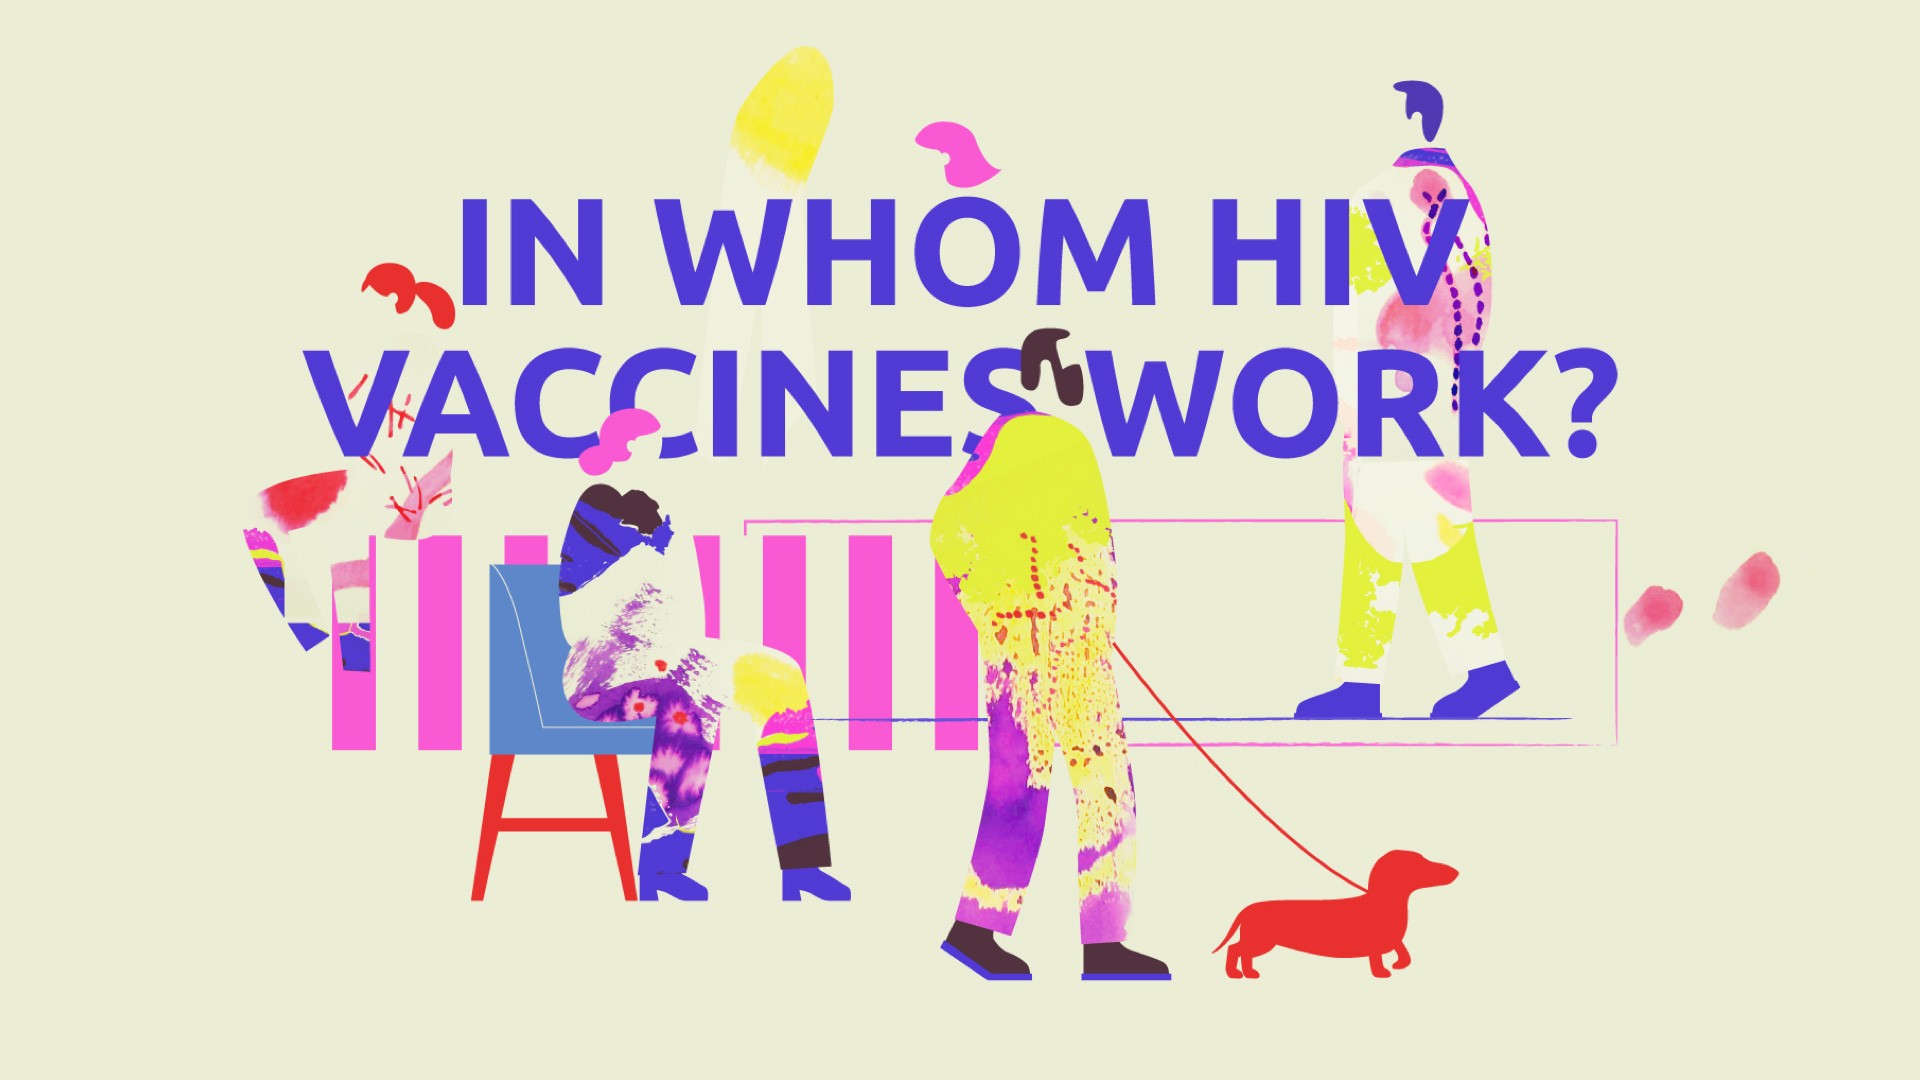 IN WHOM HIV VACCINES WORK IMPROVING HIV VACCINES RESPONSES WITH BACTERIA